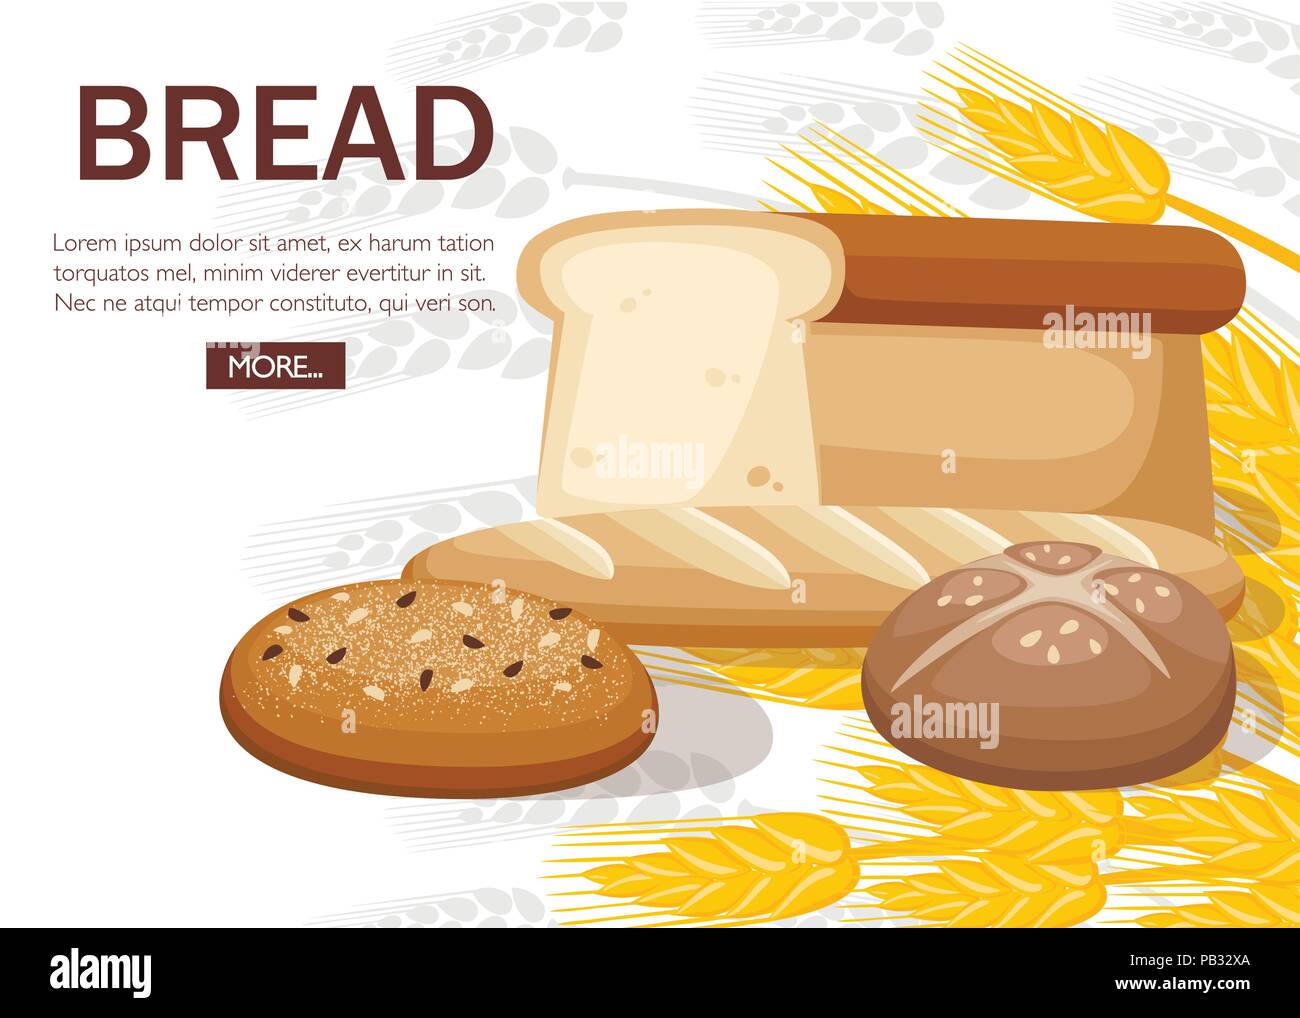 Group of bakery bread. Wheat bread, french baguette, ciabatta, toast bread. Concept design for bakery. Flat vector illustration on white background wi Stock Vector